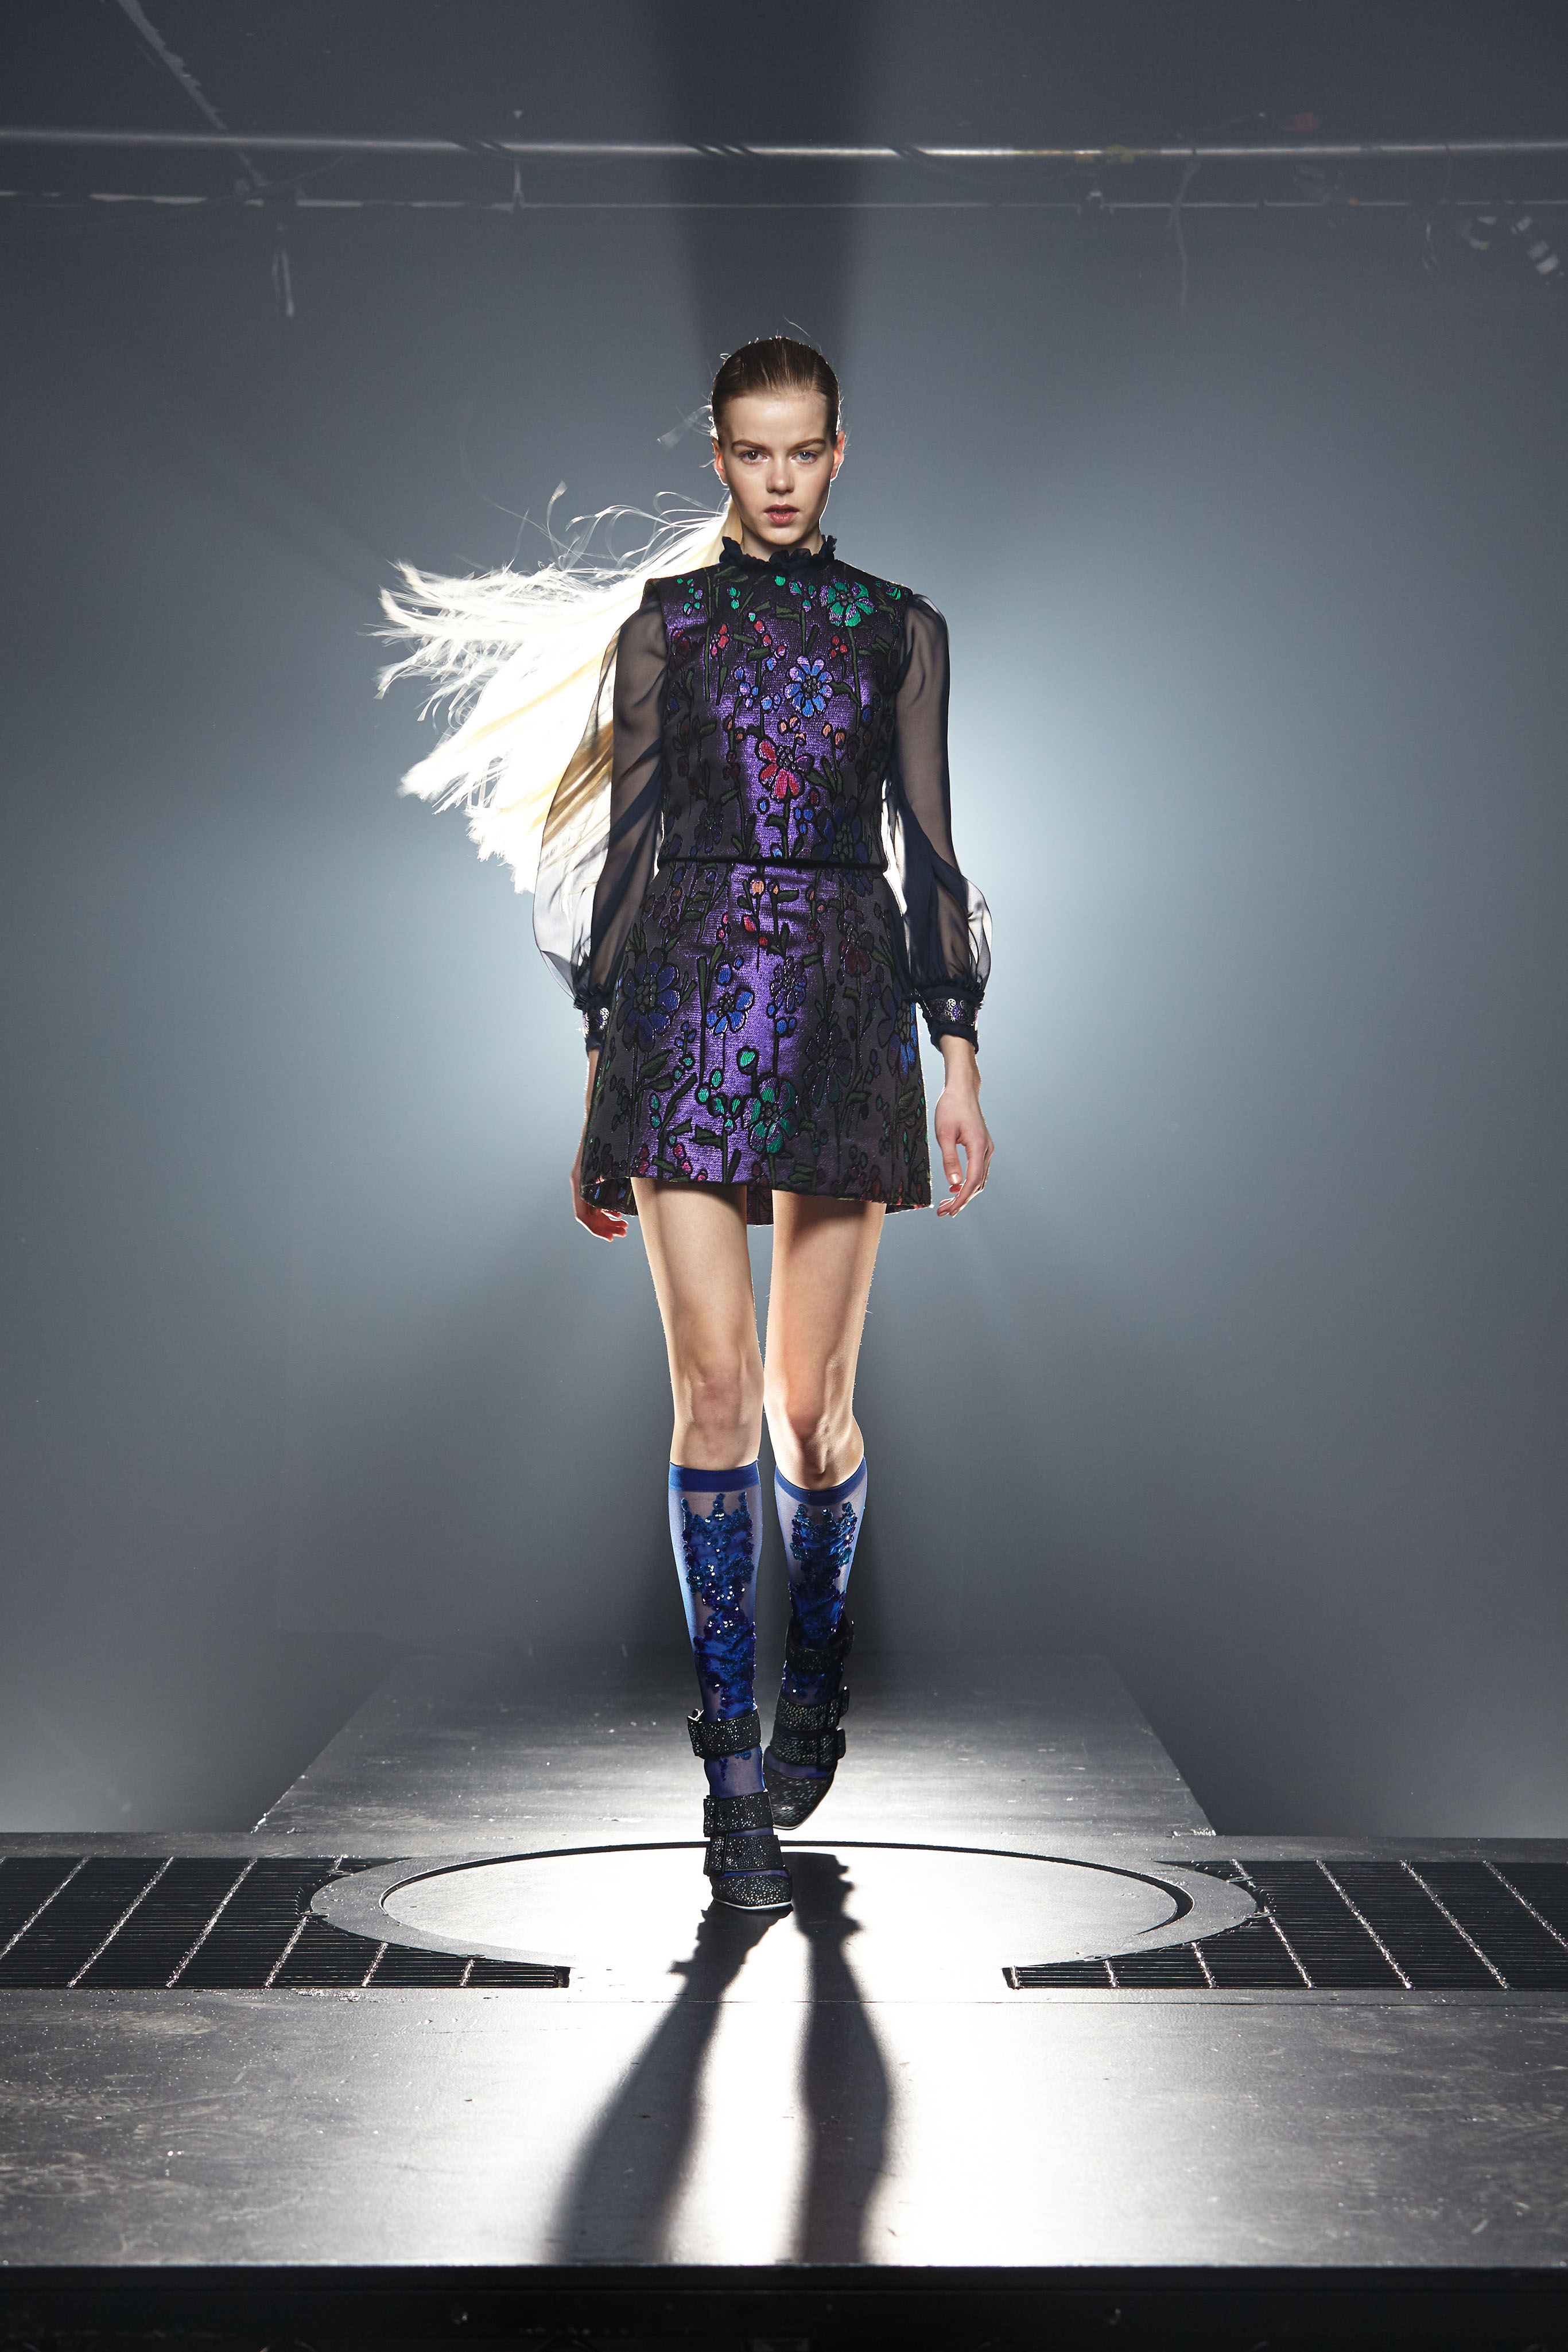 Cynthia Rowley Discusses Her Fall 2015 Digital Runway Show | HuffPost Life